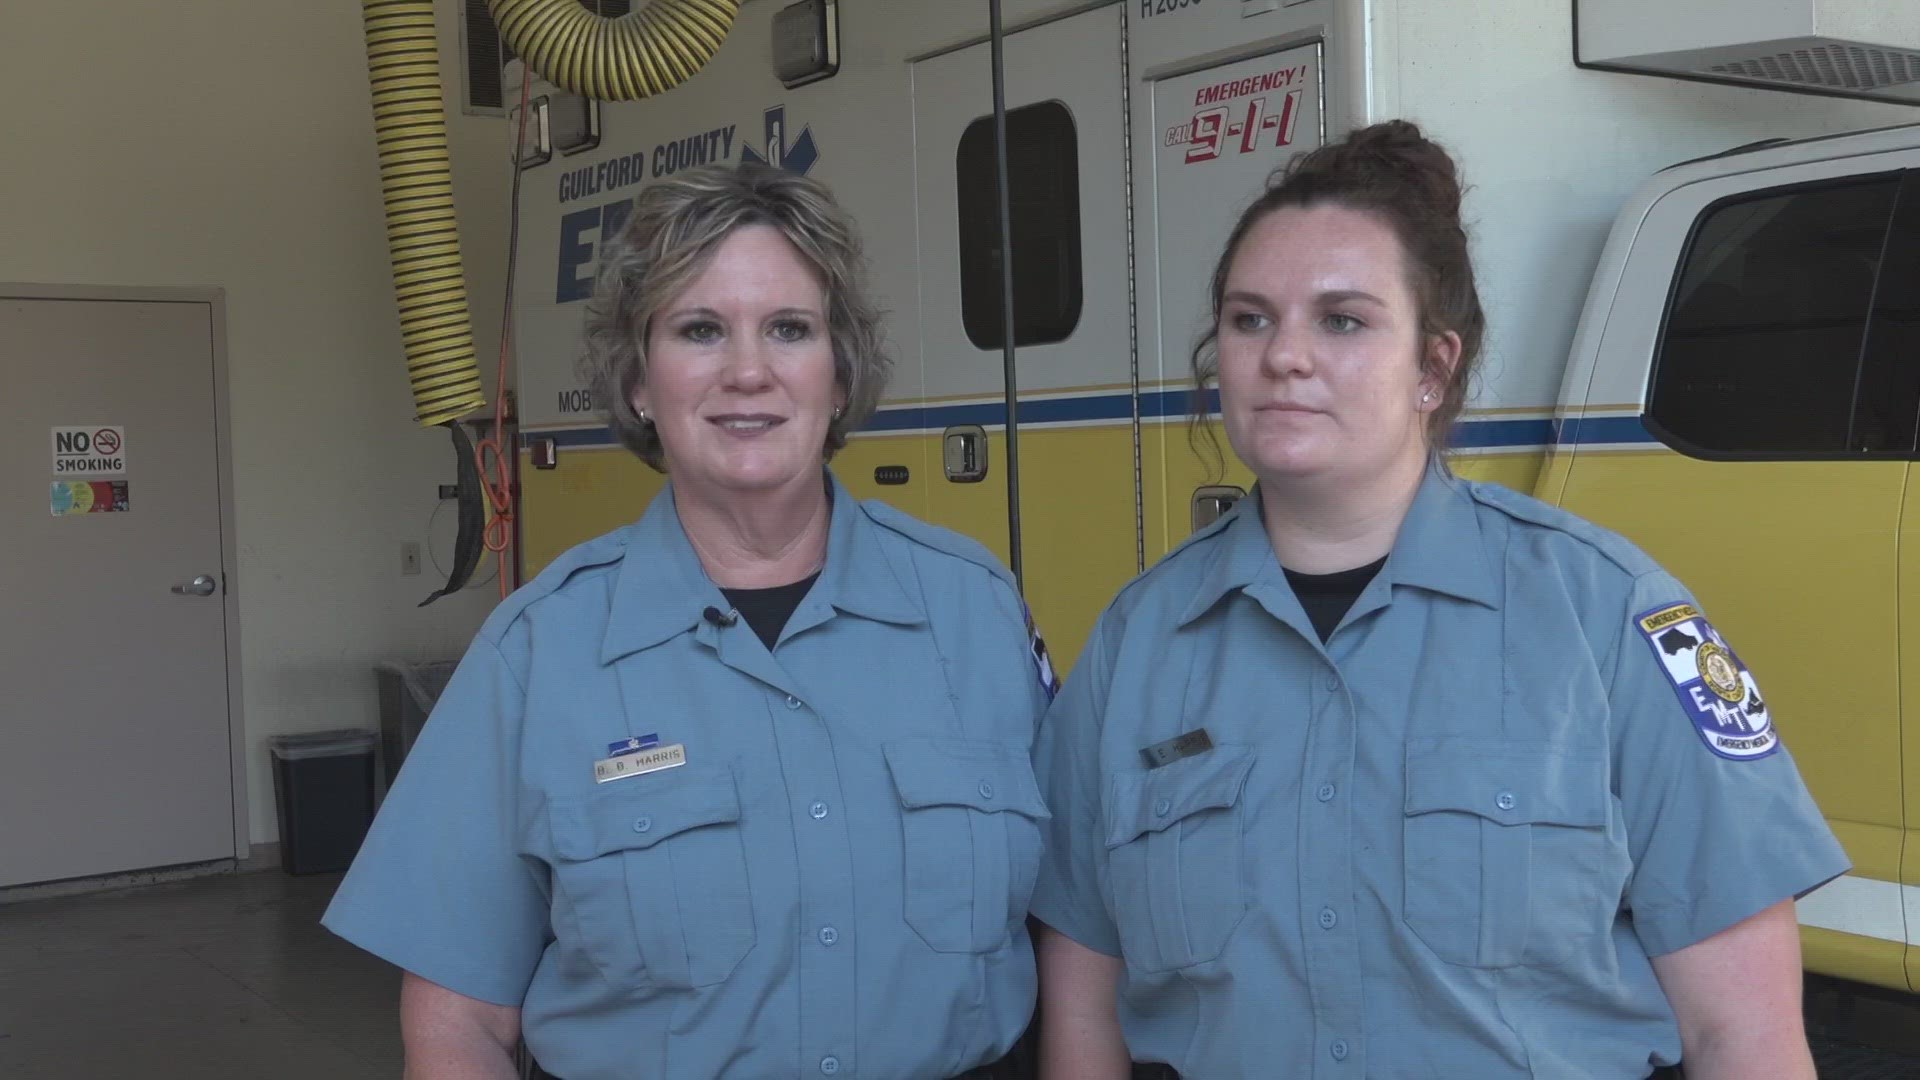 Beth and Lindsey Harris each work for the county EMS department. Both say they value getting a chance to do good together.